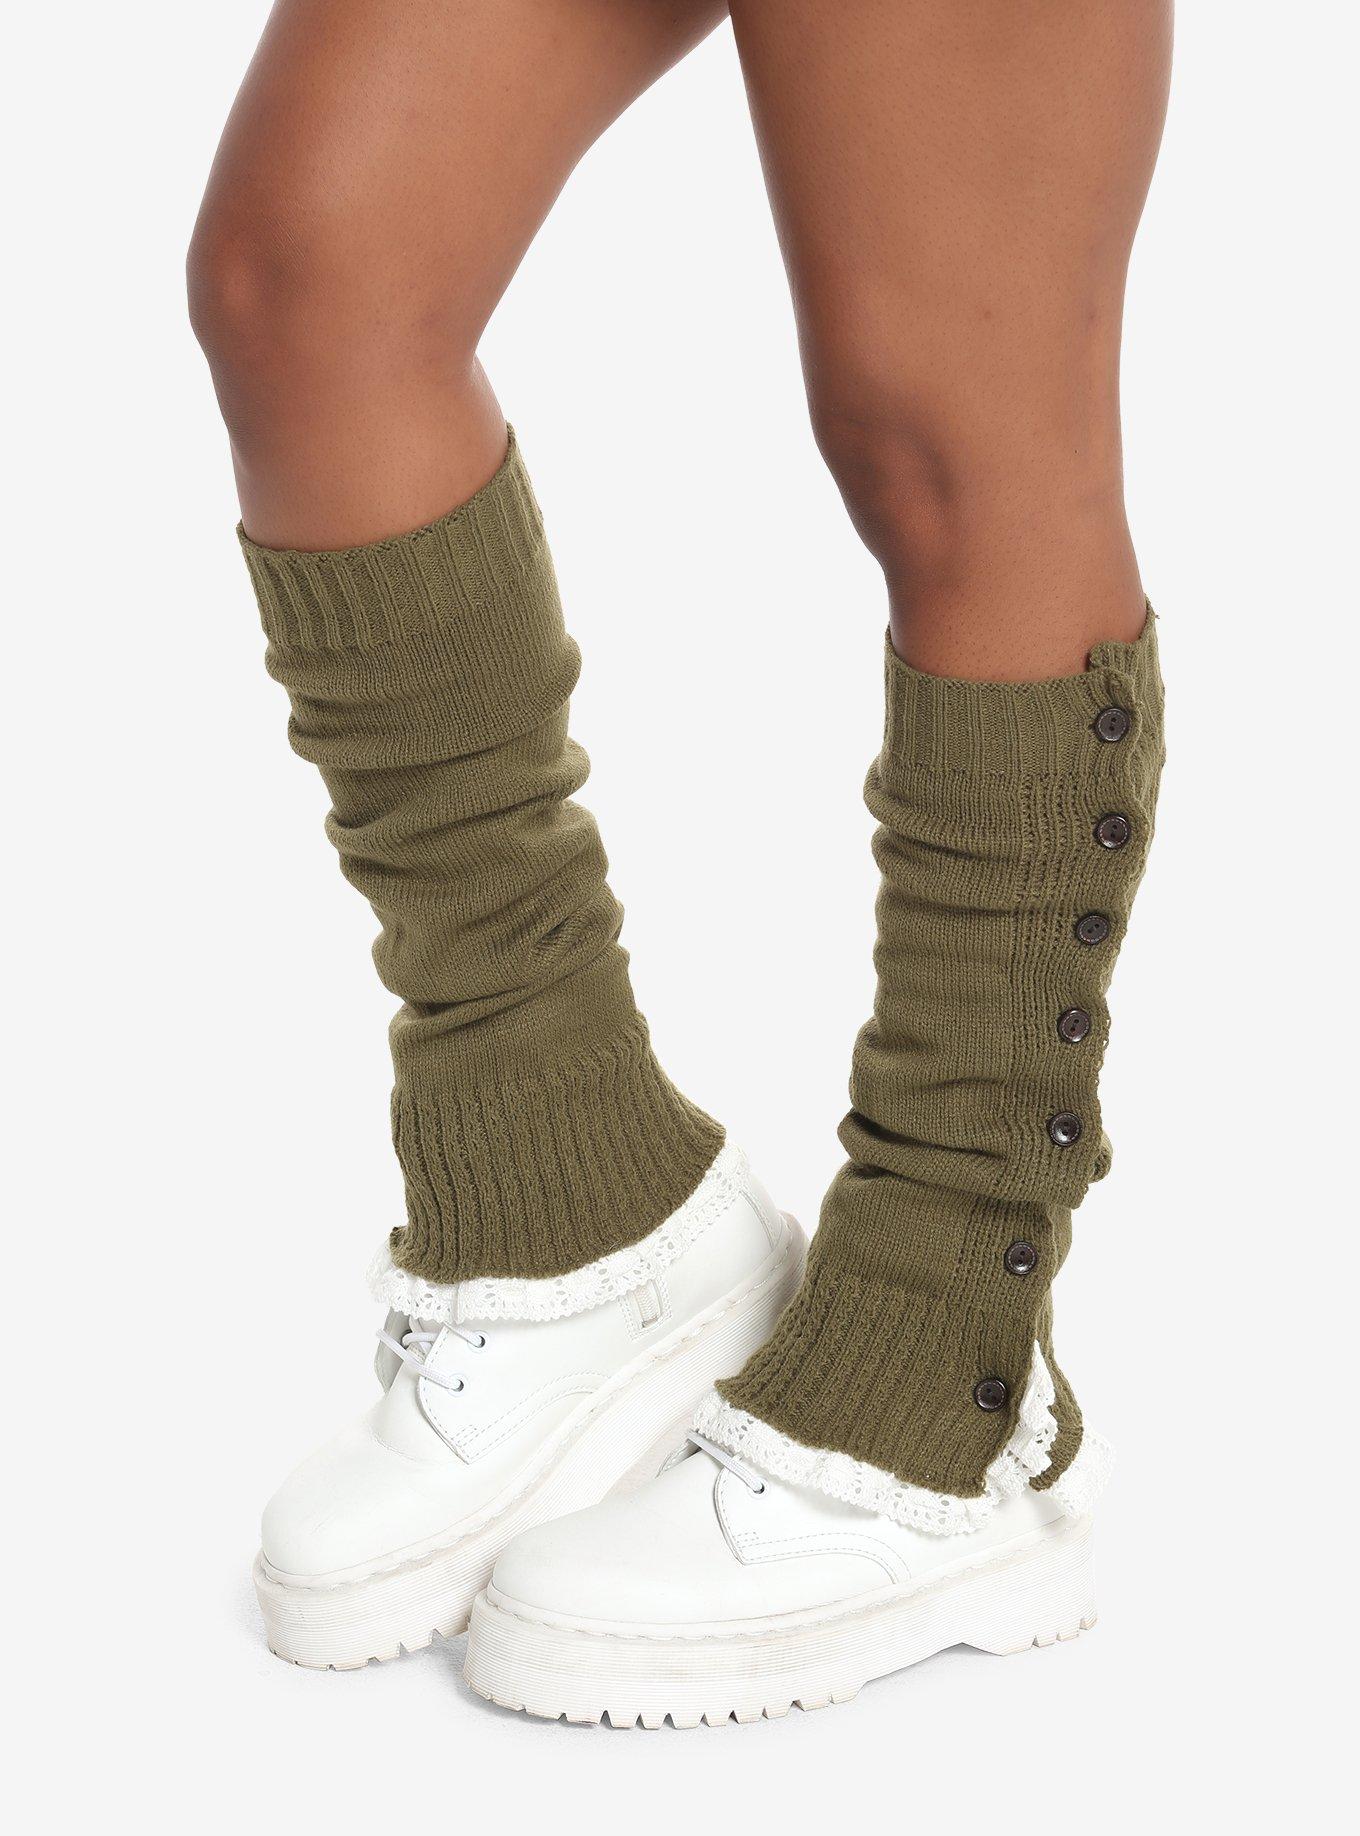 Olive Button Lace Leg Warmers, , hi-res